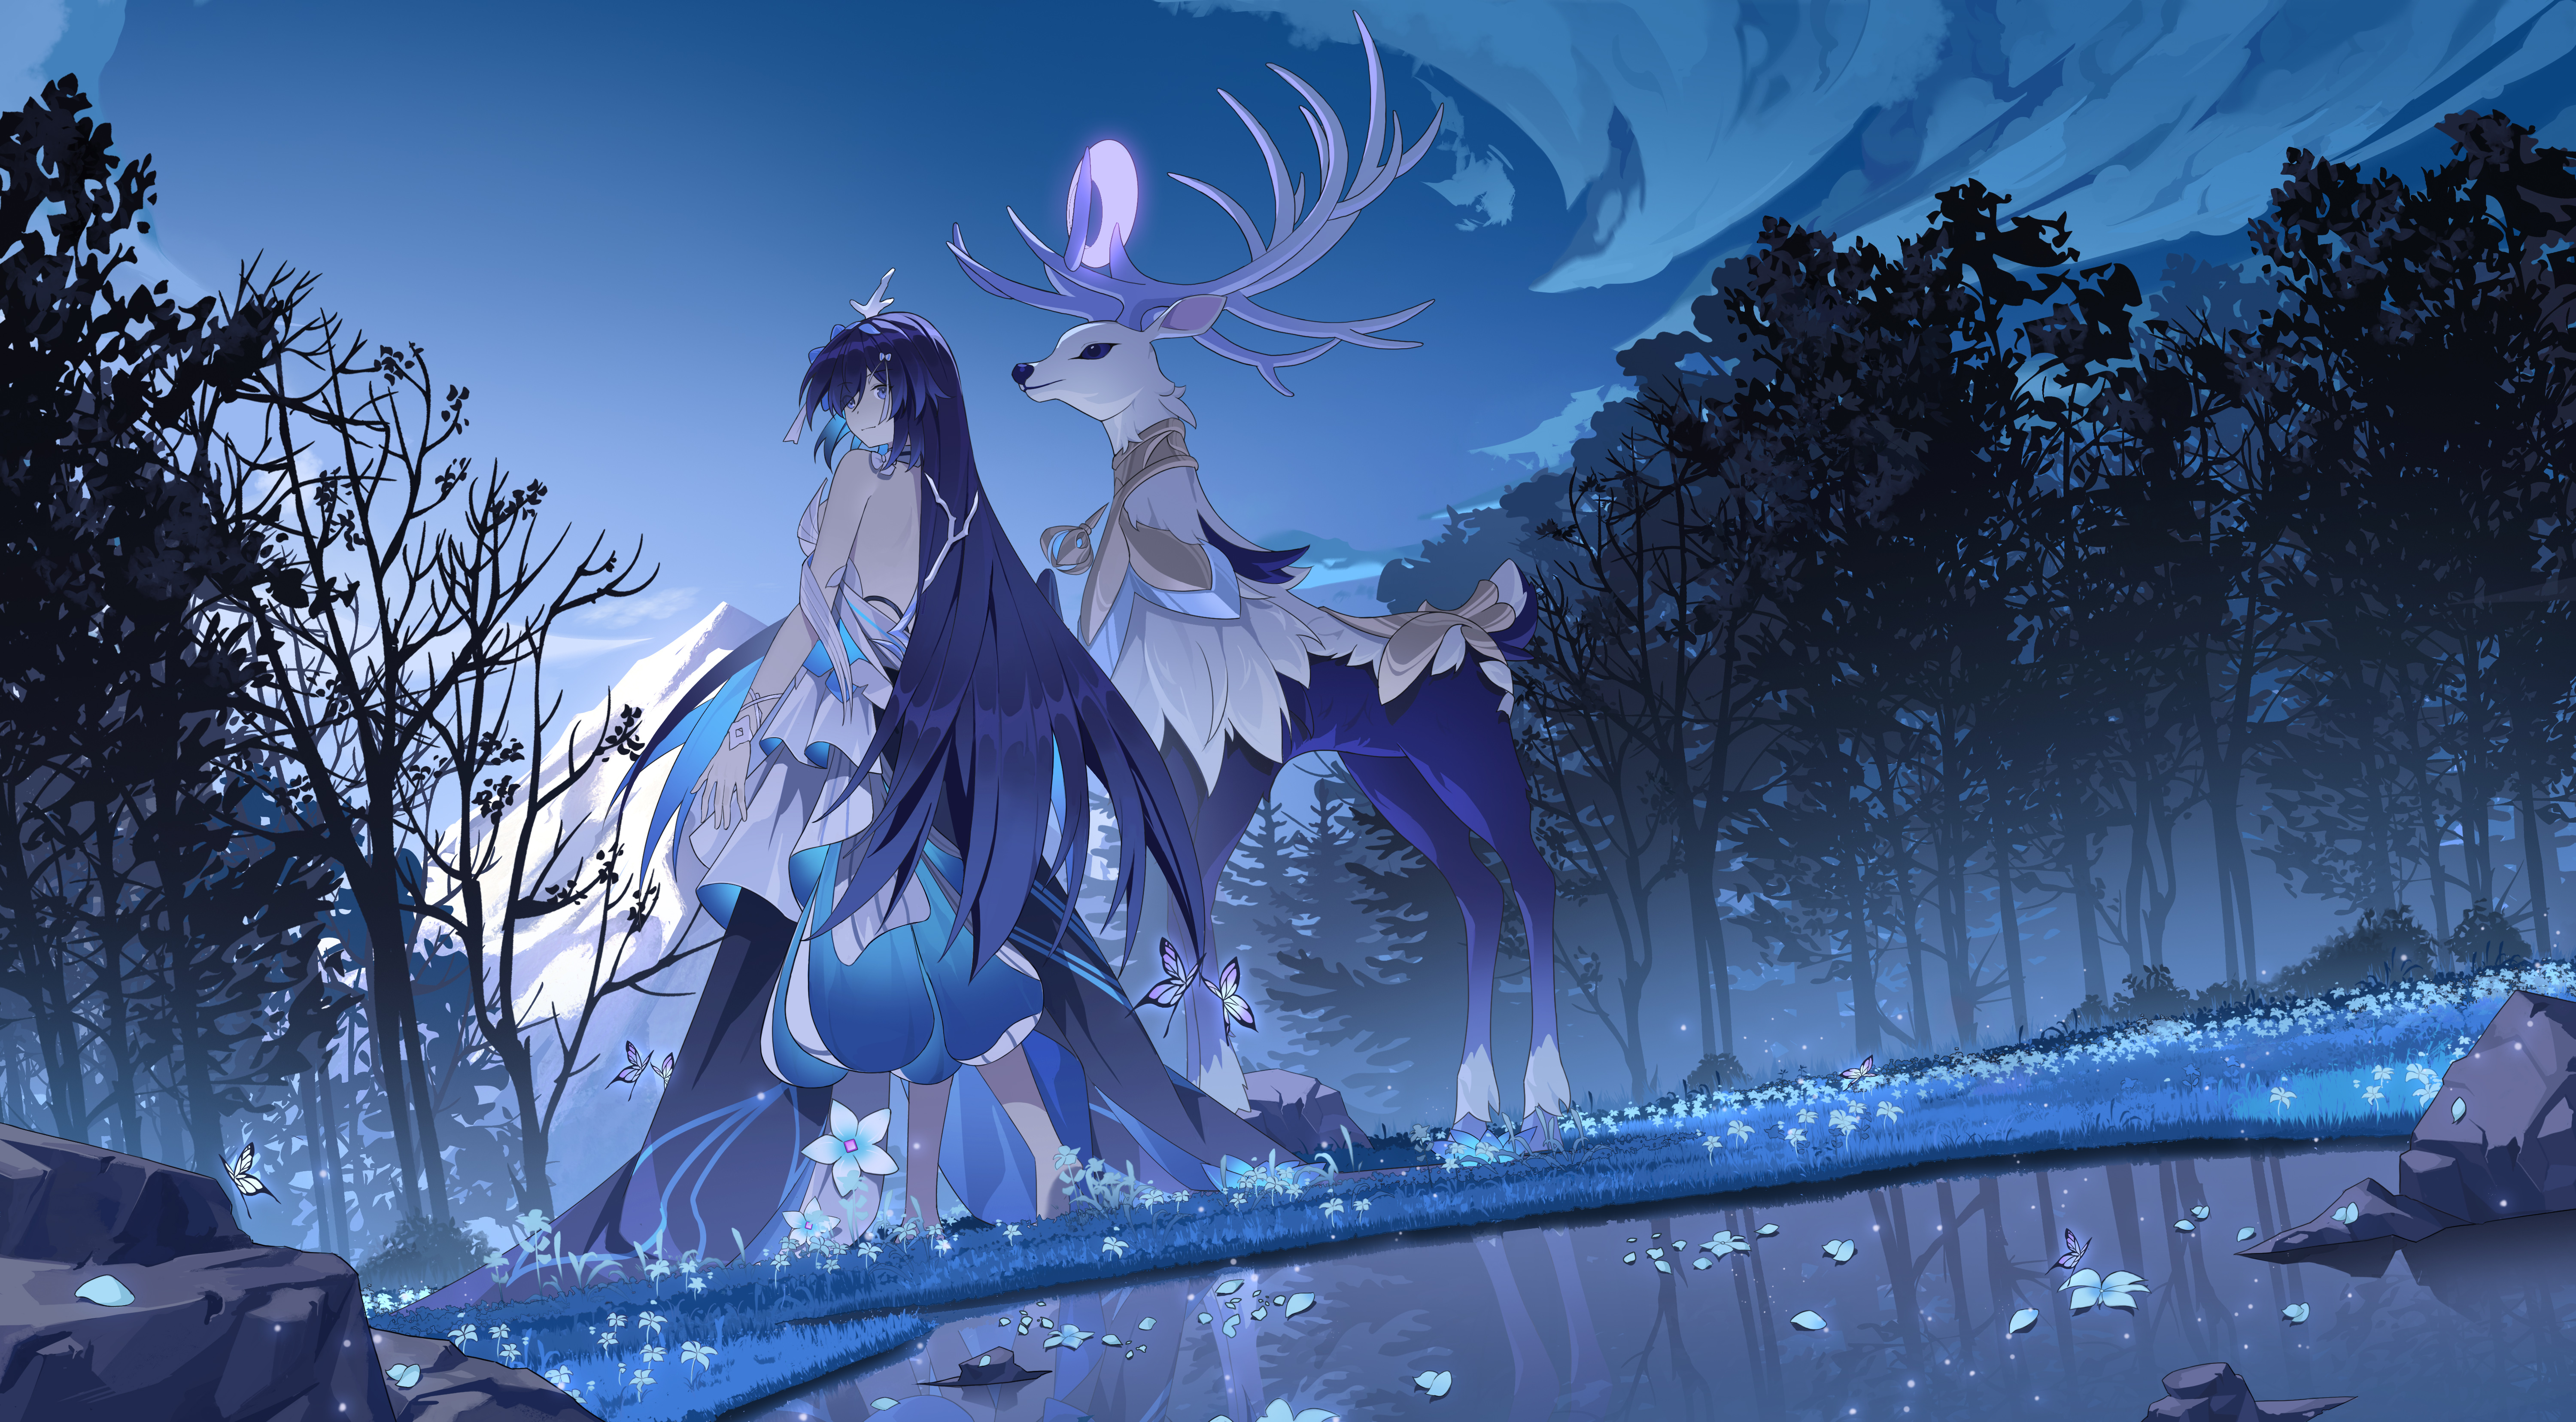 Anime 6000x3312 anime anime girls Honkai Impact 3rd Herrscher of Rebirth Seele Vollerei forest Honkai Impact clouds sky reflection water standing long hair animals butterfly petals rocks